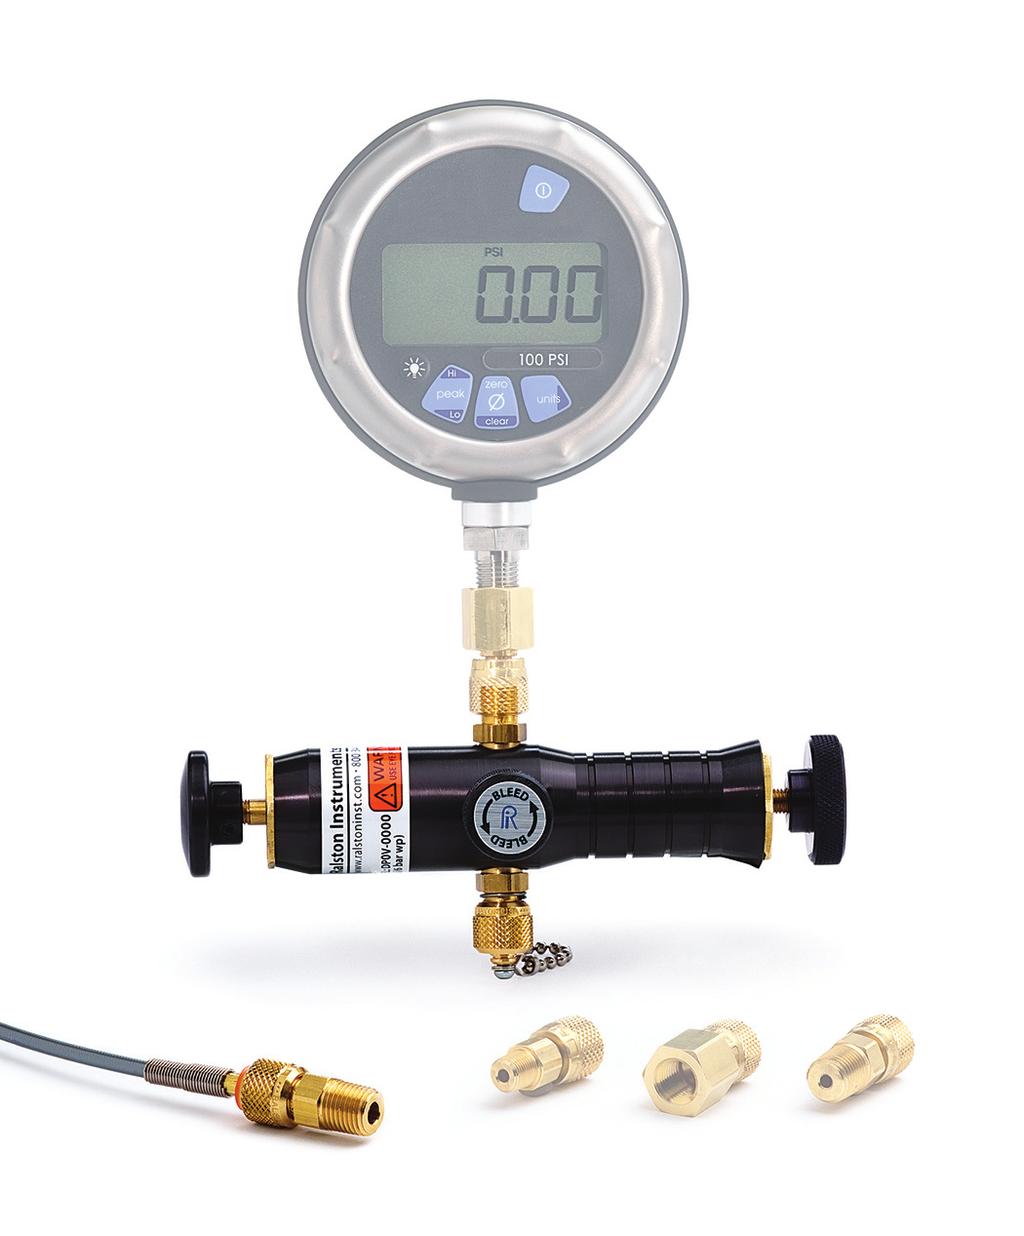 Pneumatic Hand Pumps (direct acting) DP0V (100 psi / 7 bar) The most economical solution for very precise low pressure calibration using a precision test gauge or pressure calibrator as the reference.